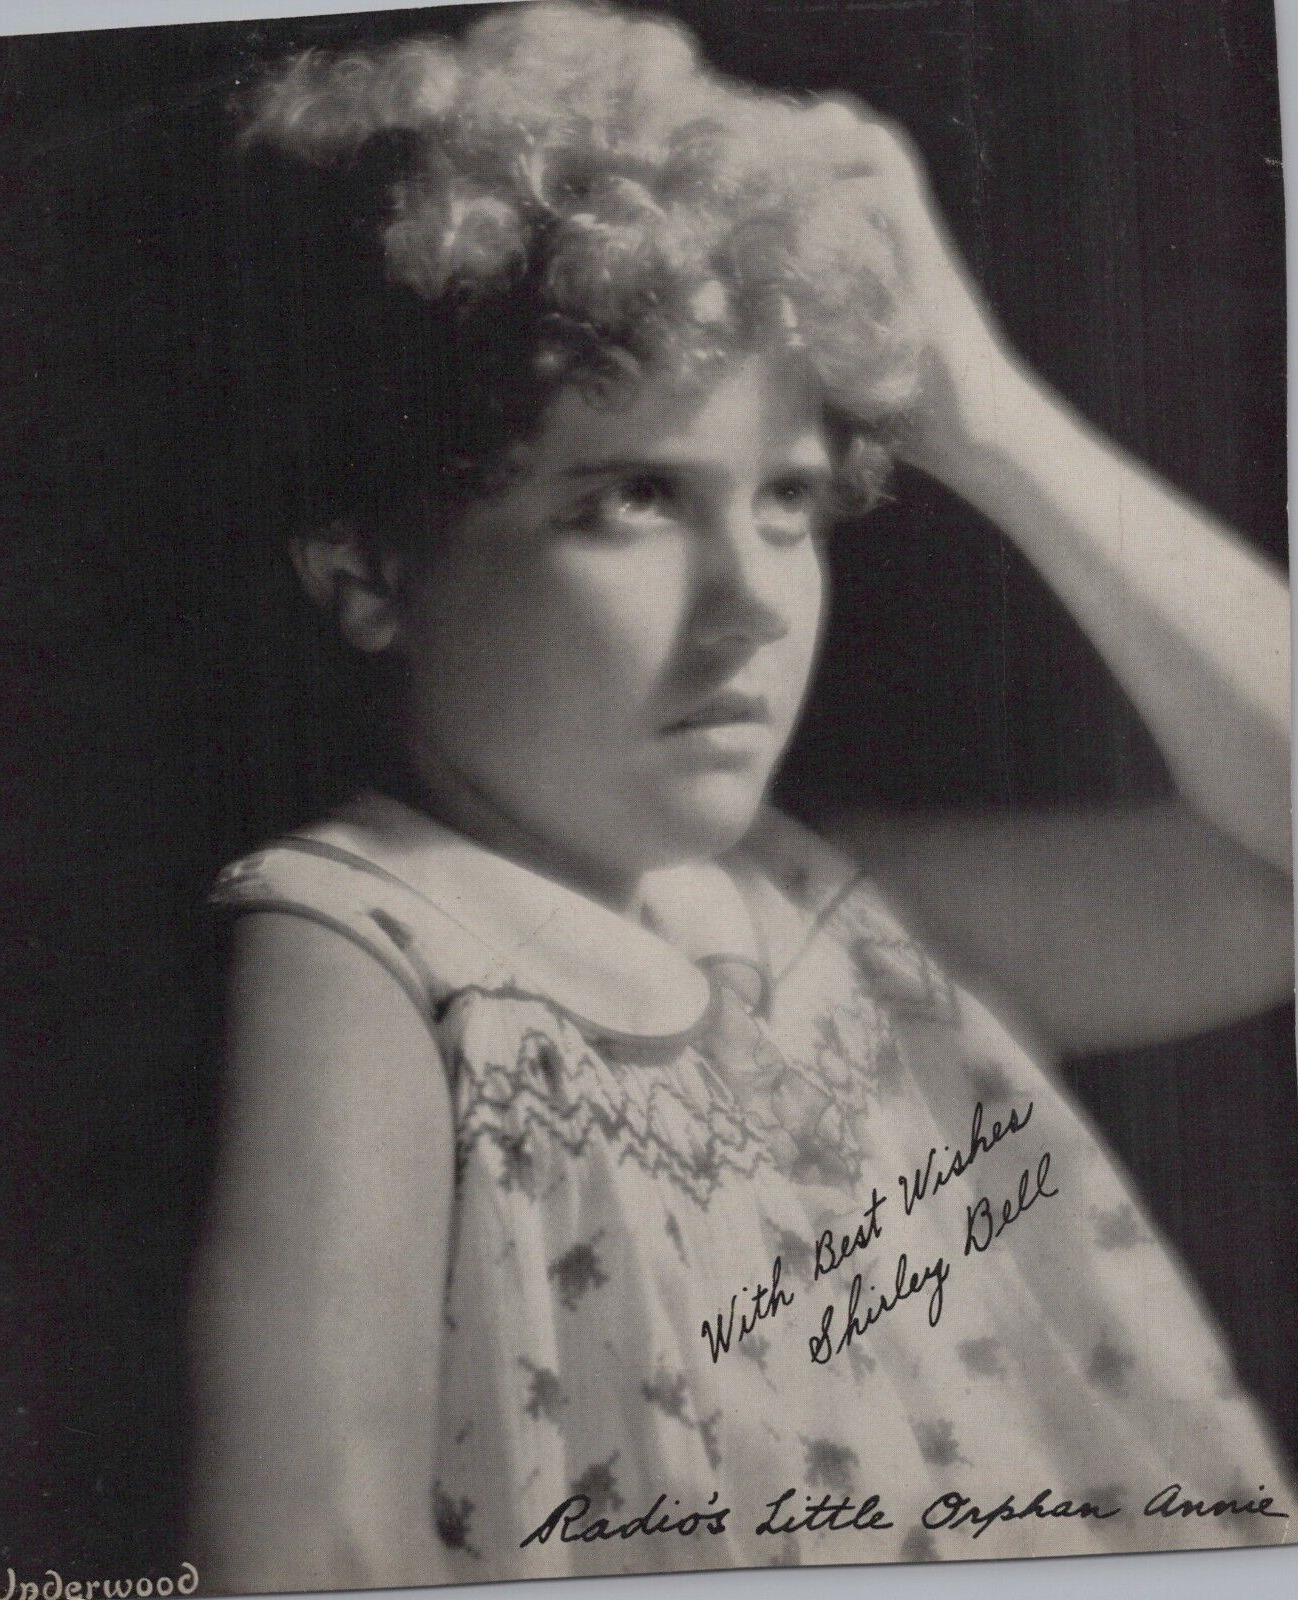 HOLLYWOOD SHIRLEY BELL RADIO'S LITTLE ORPHAN ANNIE 1932 SIGNED ORIG Photo C27